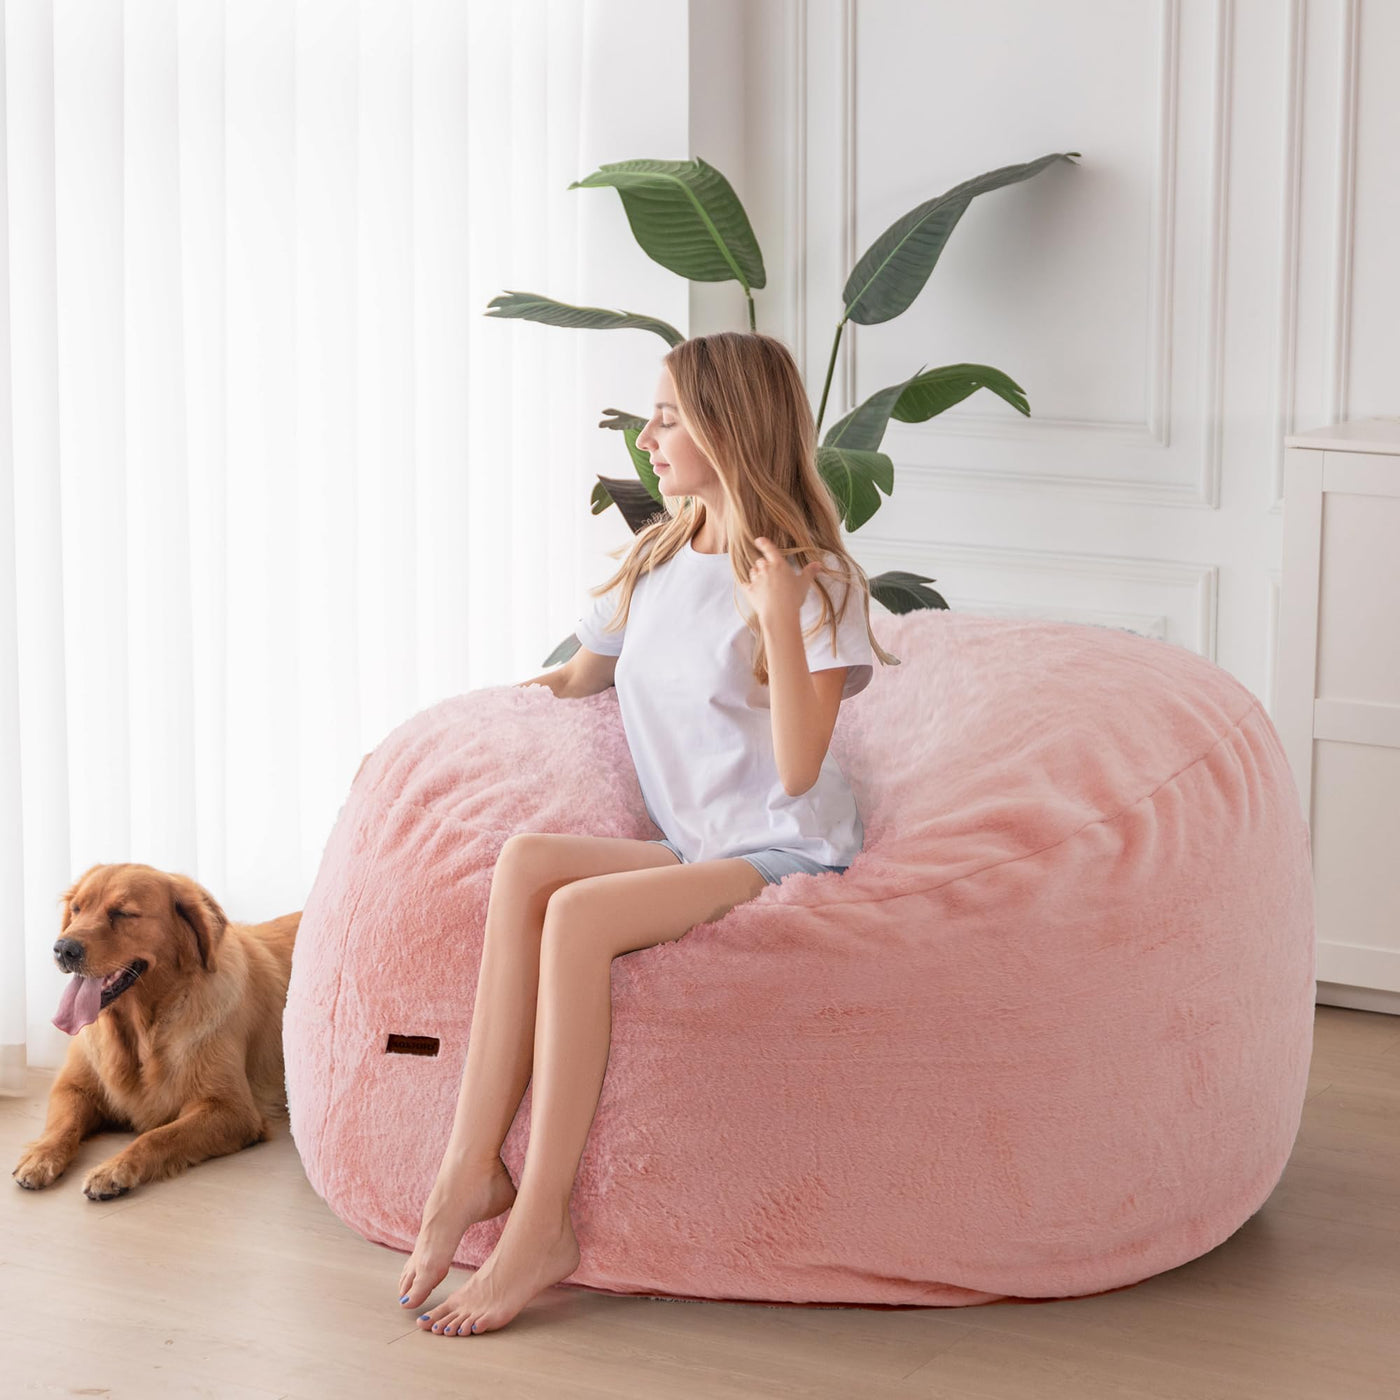 MAXYOYO Giant Bean Bag, Faux Fur Convertible Beanbag Folds from Lazy Chair to Floor Mattress Bed, Pink